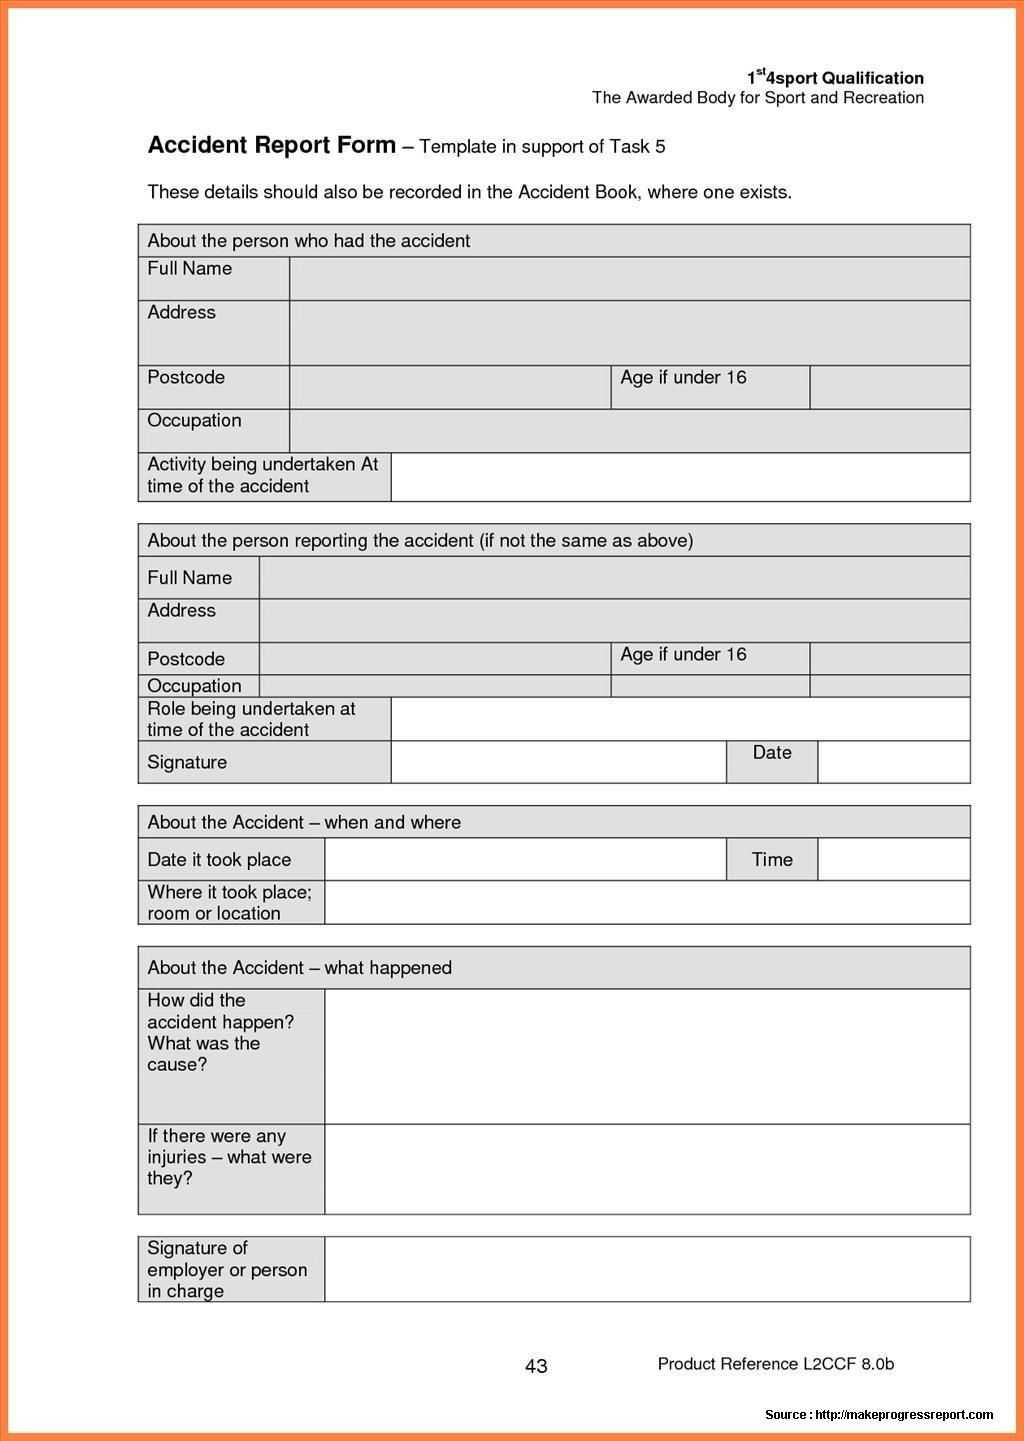 Construction Accident Report Form Sample | Incident Report Inside Incident Report Form Template Doc